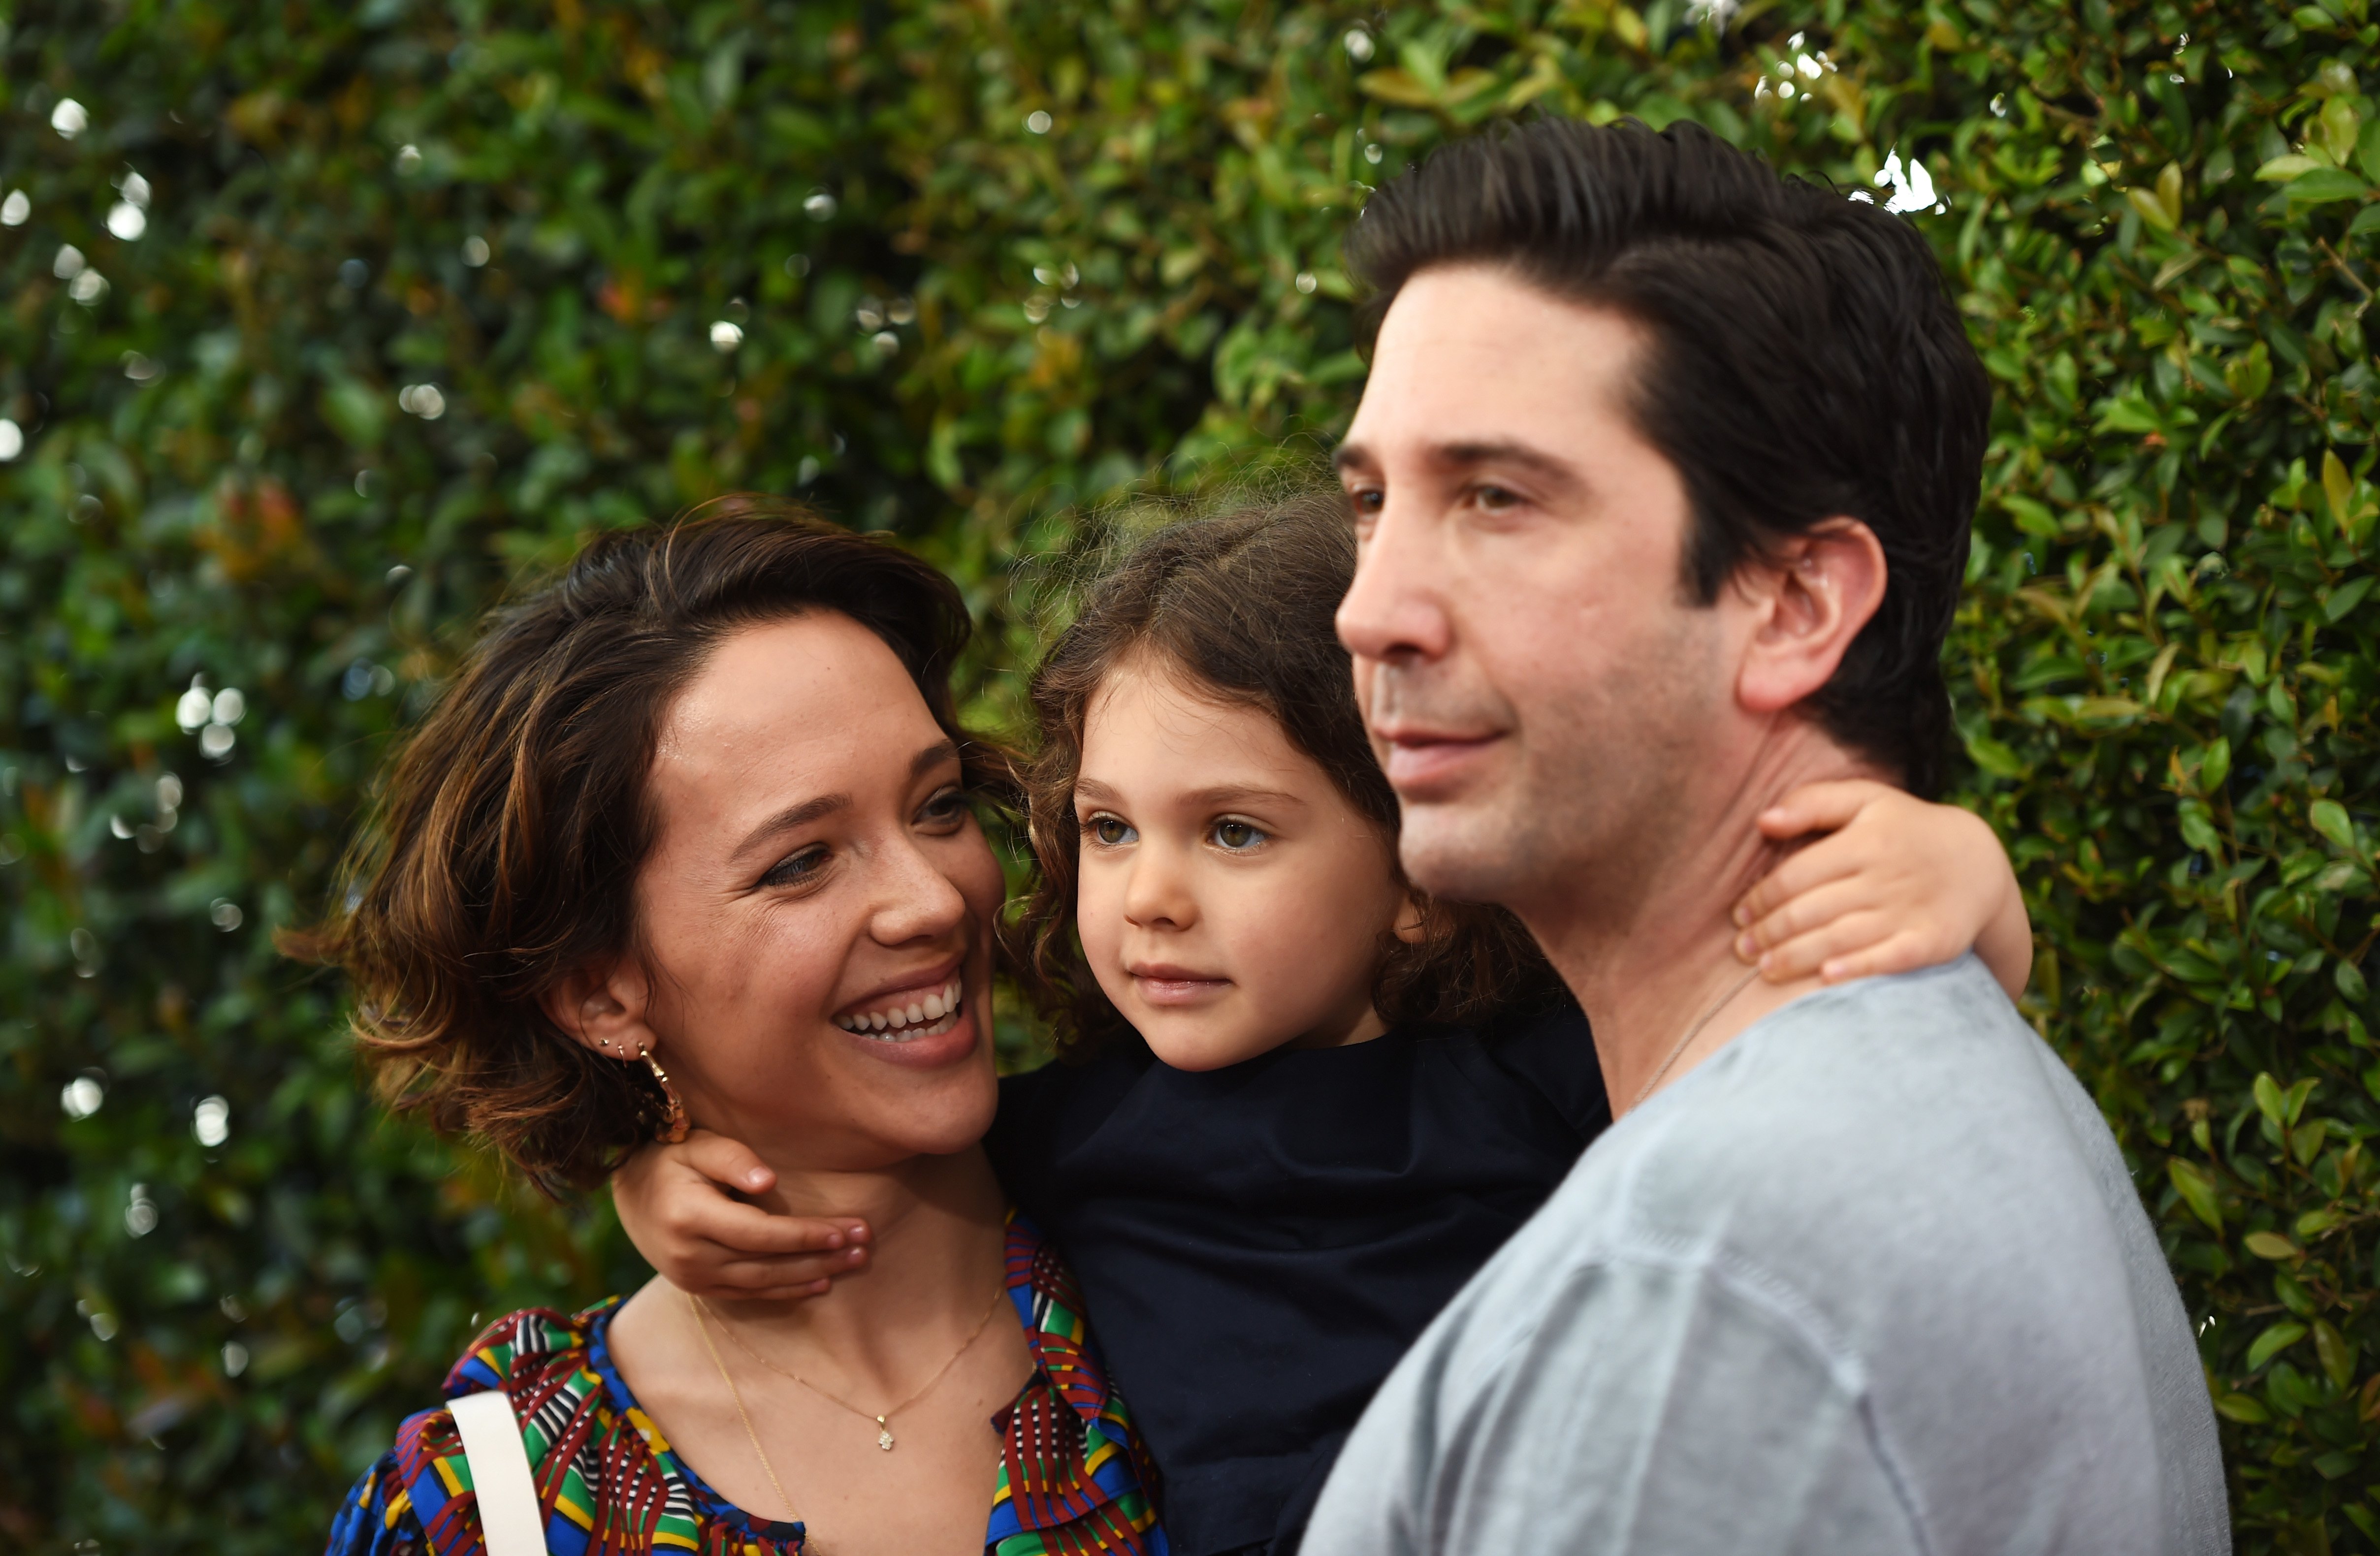 David Schwimmer and Zoe Buckman arrive with their daughter Cleo Buckman Schwimmer at the 12th Annual John Varvatos Stuart House Benefit at John Varvatos on April 26, 2015 in Los Angeles, California. | Source: Getty Images